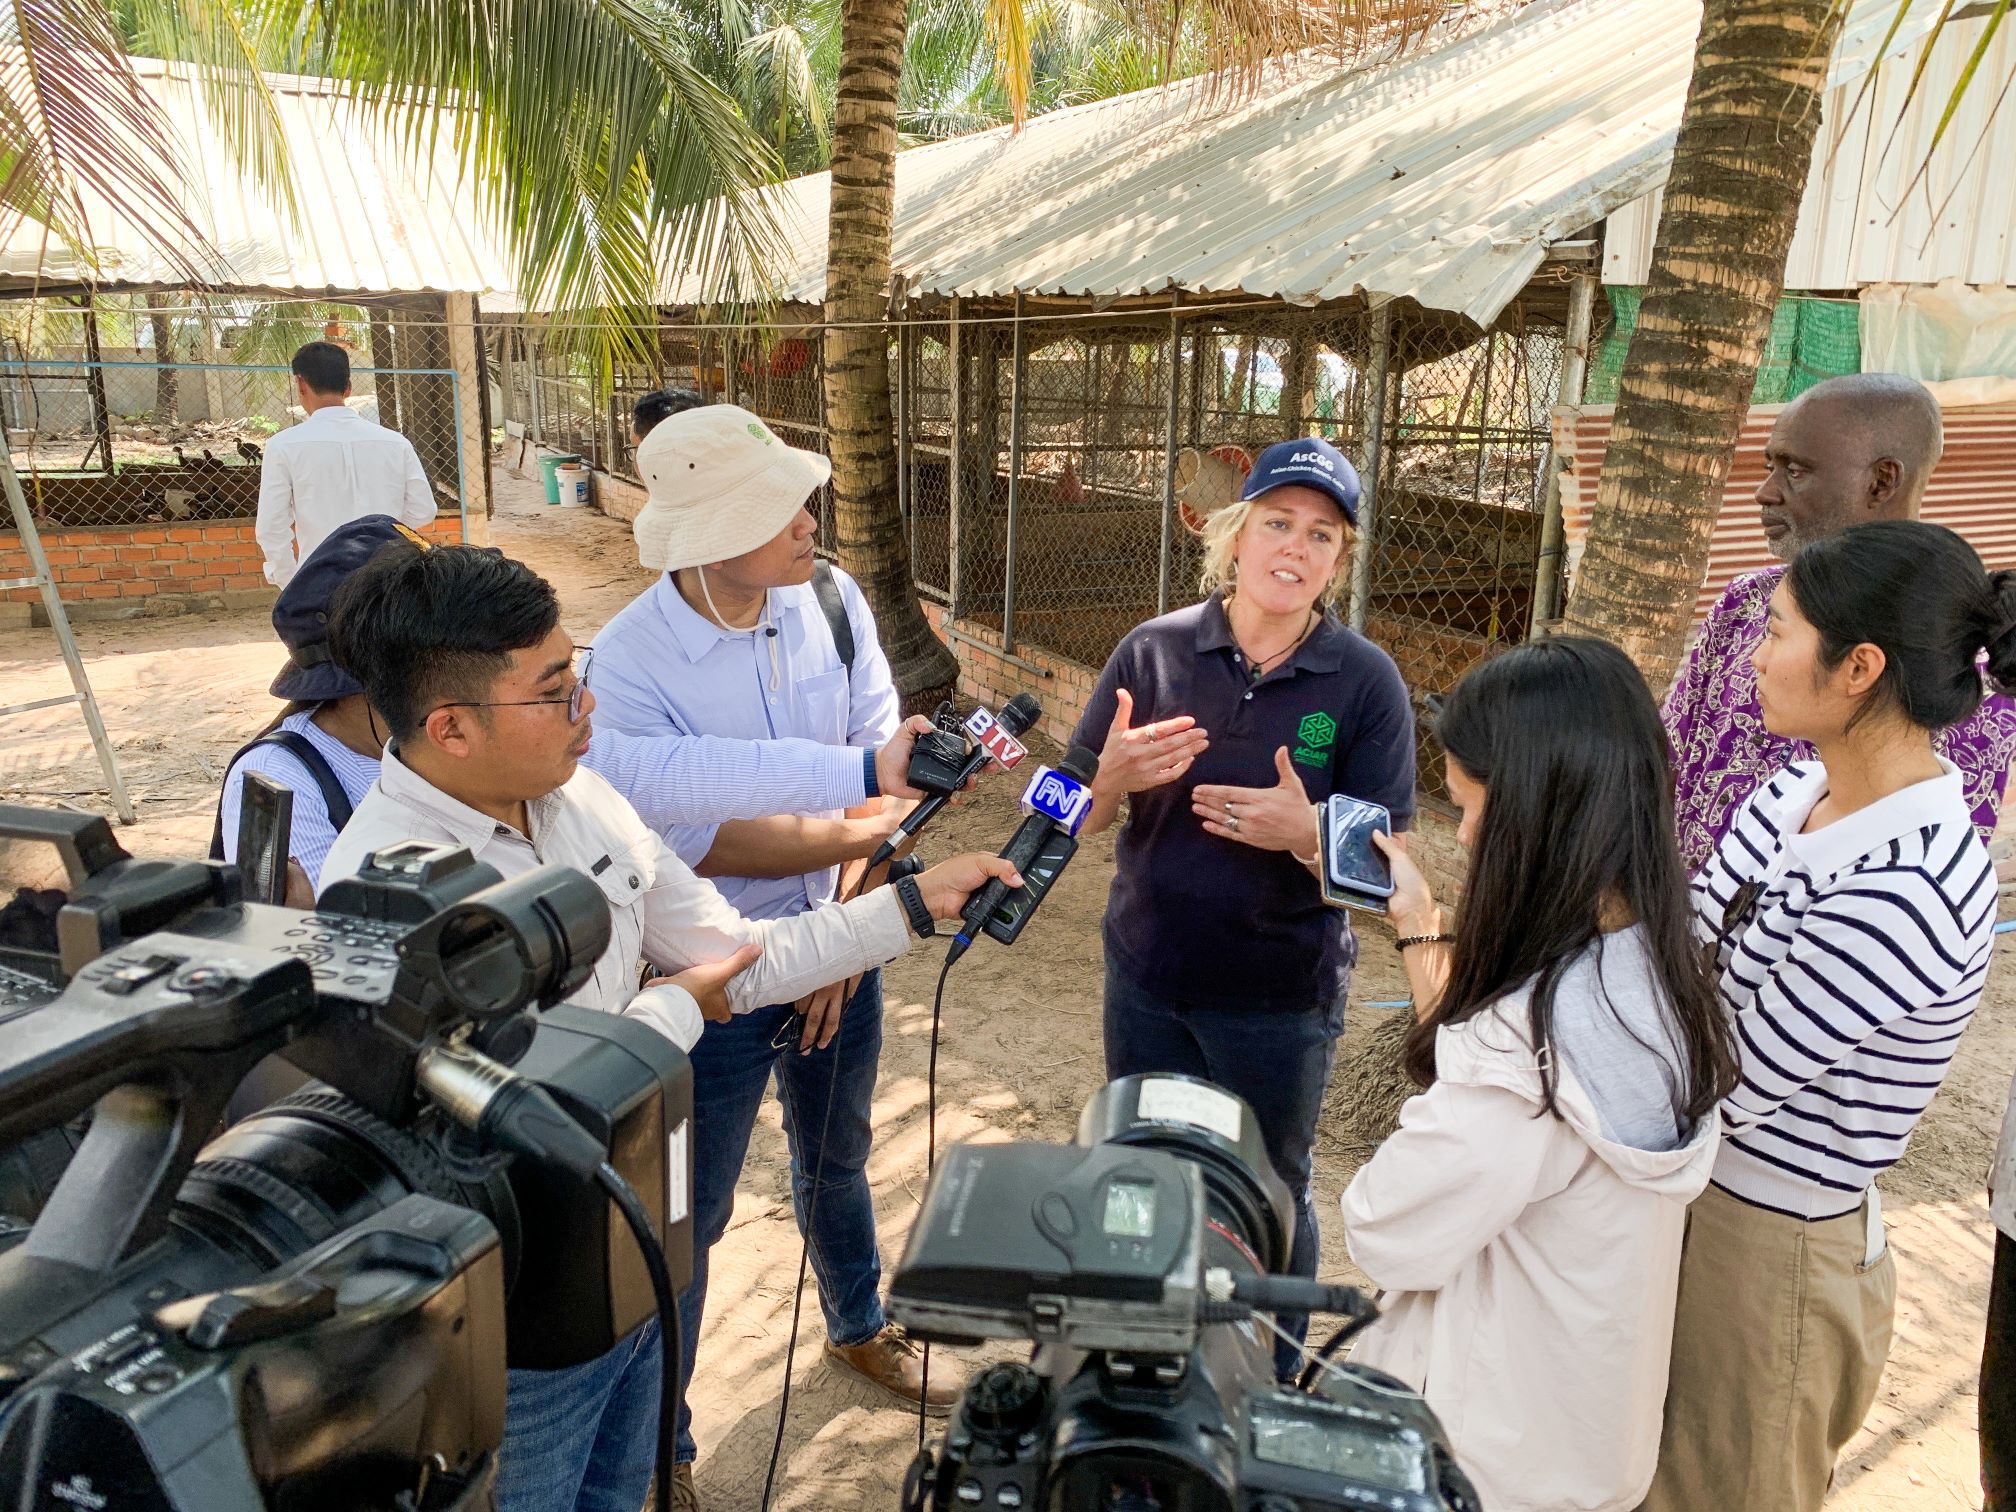 Woman being interviewed speaking with a team of journalists and reporters